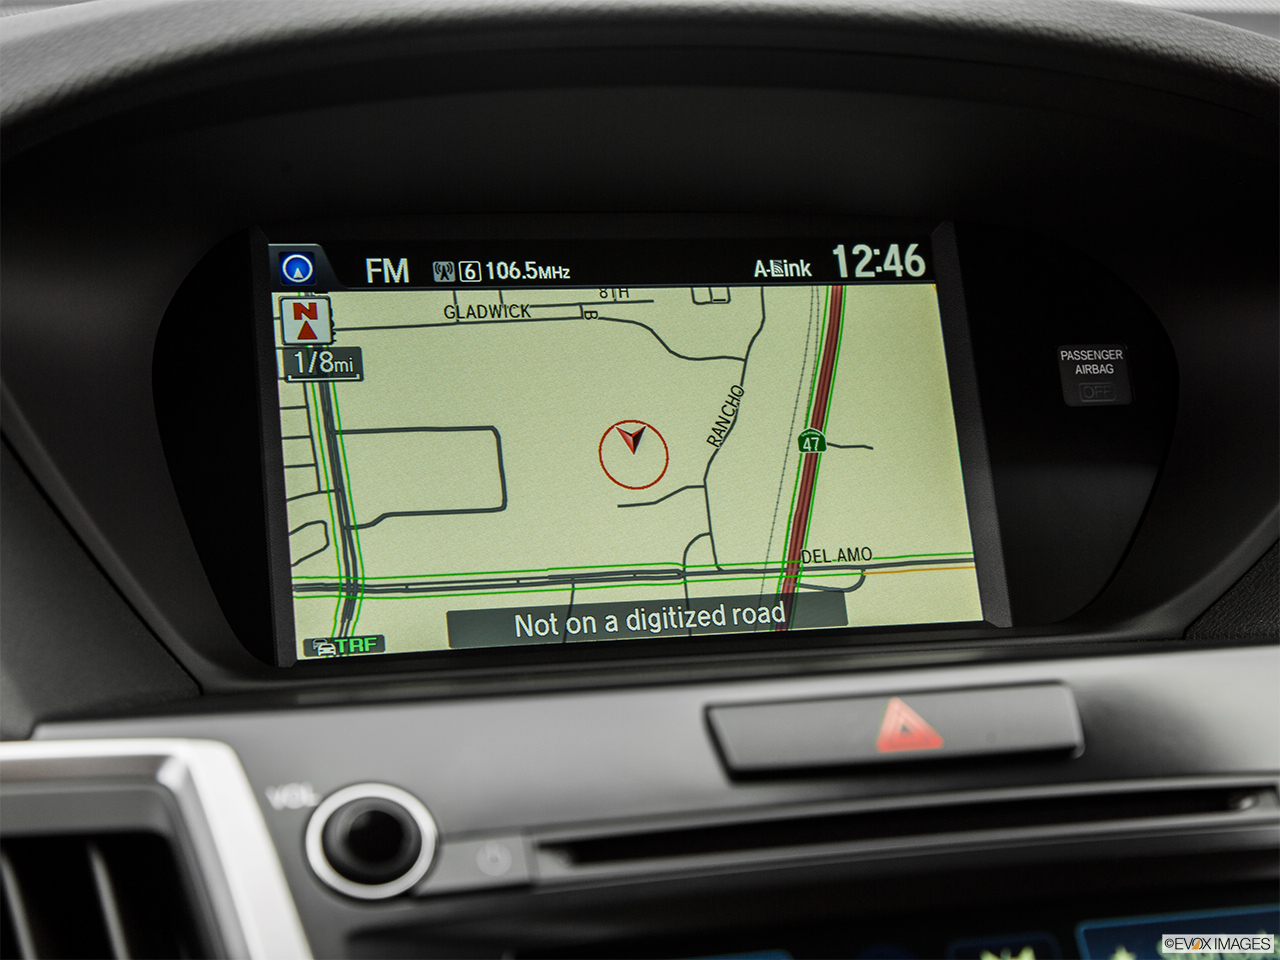 2015 Acura TLX 3.5 V-6 9-AT SH-AWD Driver position view of navigation system. 